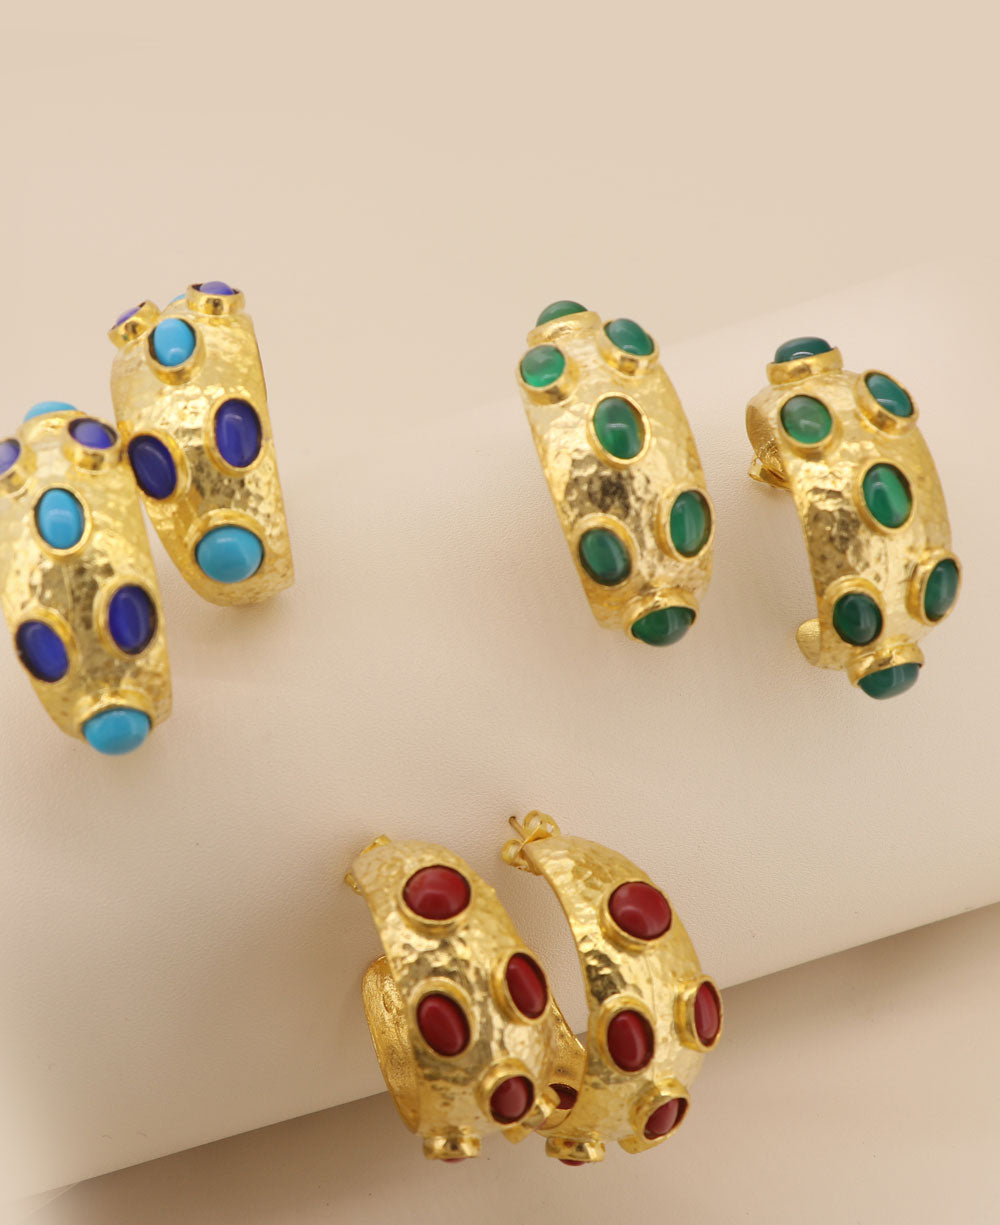 Gold Plated Brass Hoop Earrings featuring vibrant agate stones embedded on the wide circumference